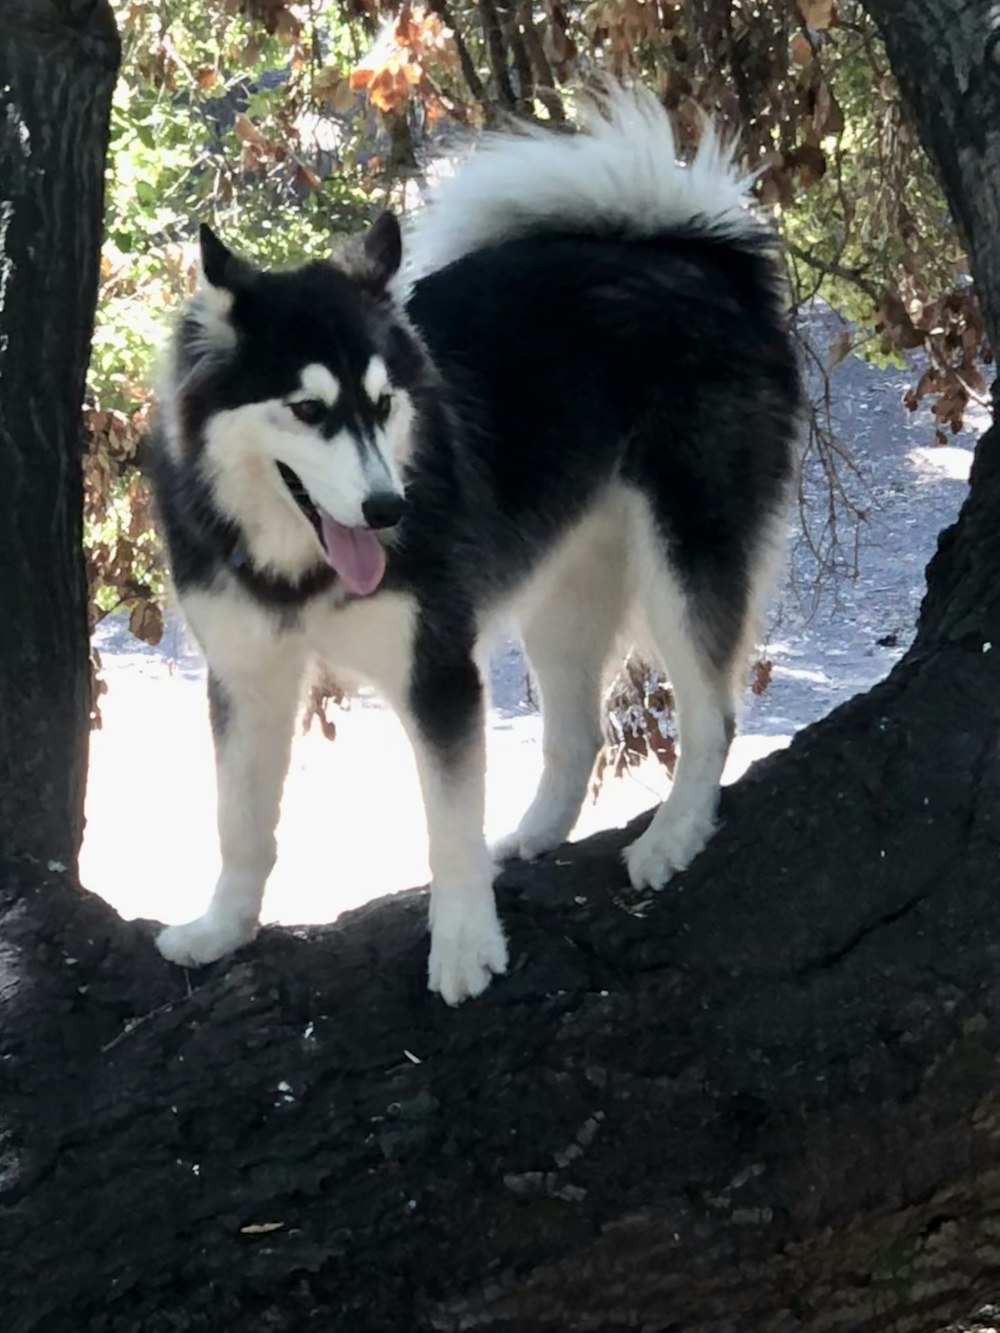 a black and white dog standing on a tree branch